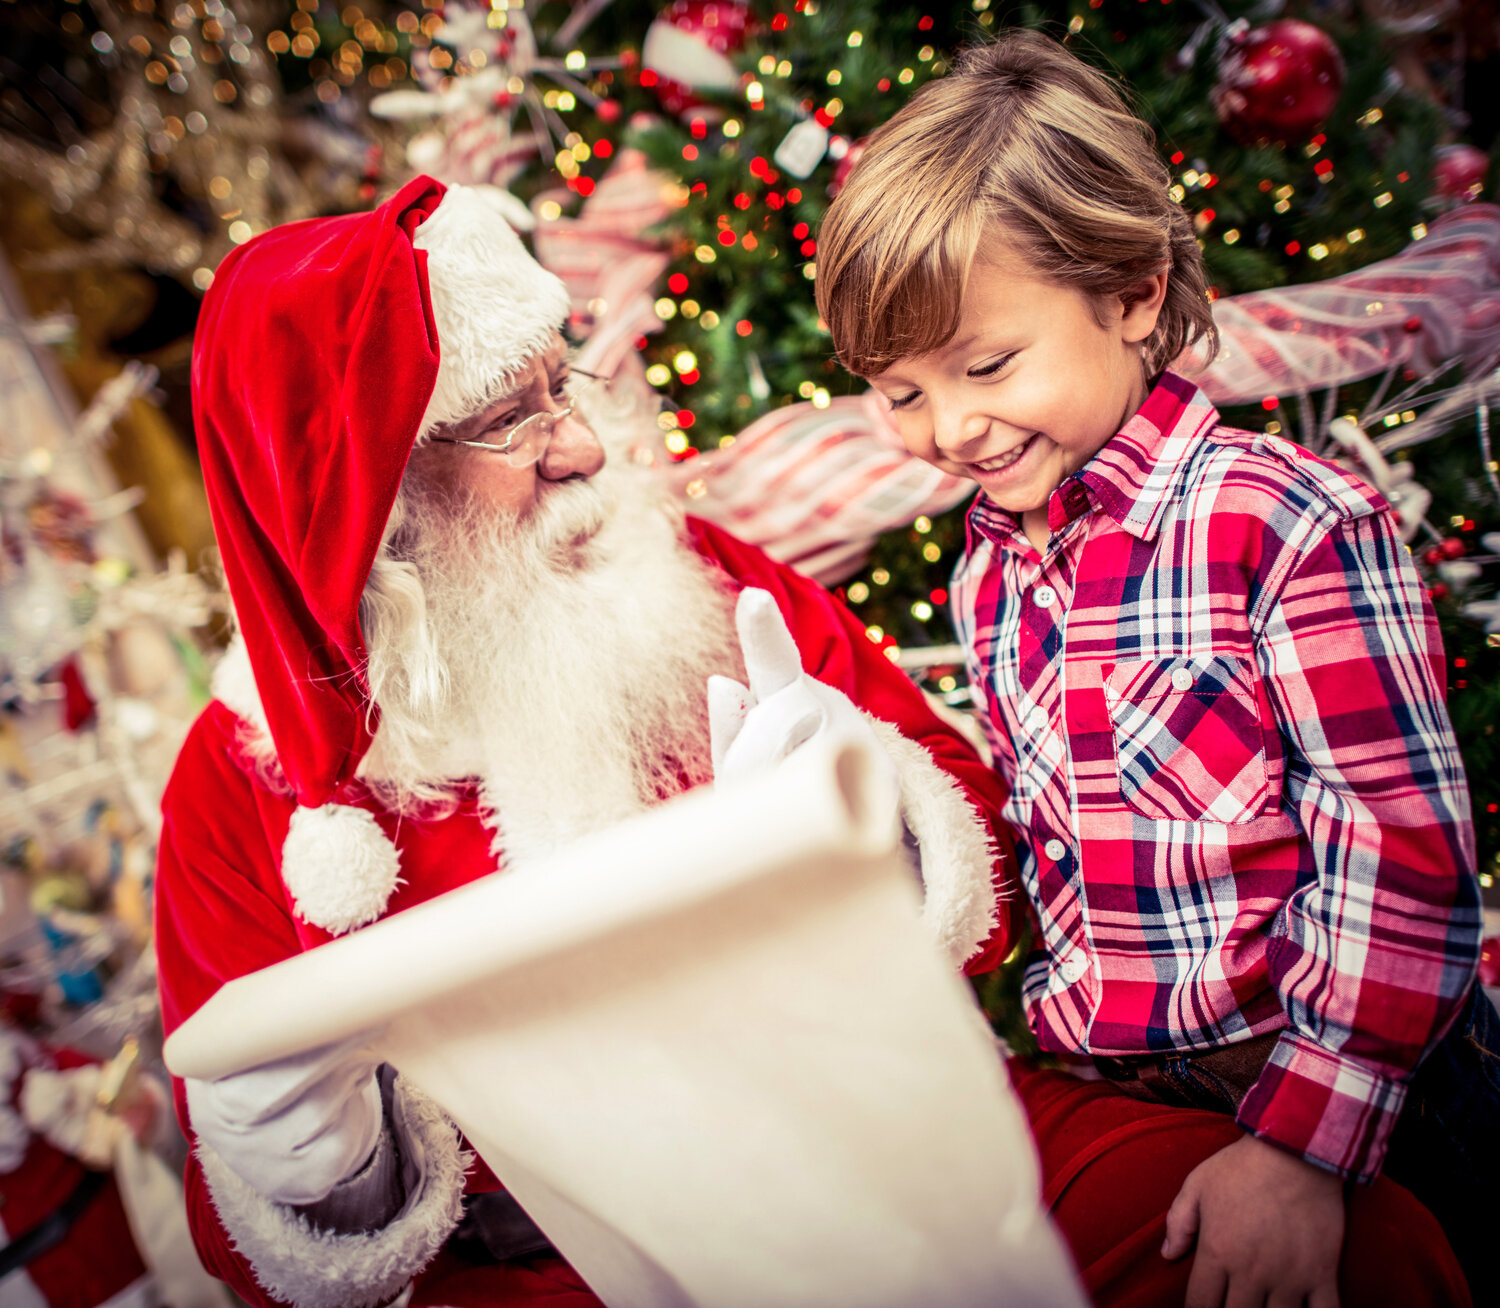 Santa Claus will be there for the children’s gift wishes and for all to take photos with him. A Santa Workshop will be open for children and the young at heart to create an ornament to hang on the community Christmas tree.